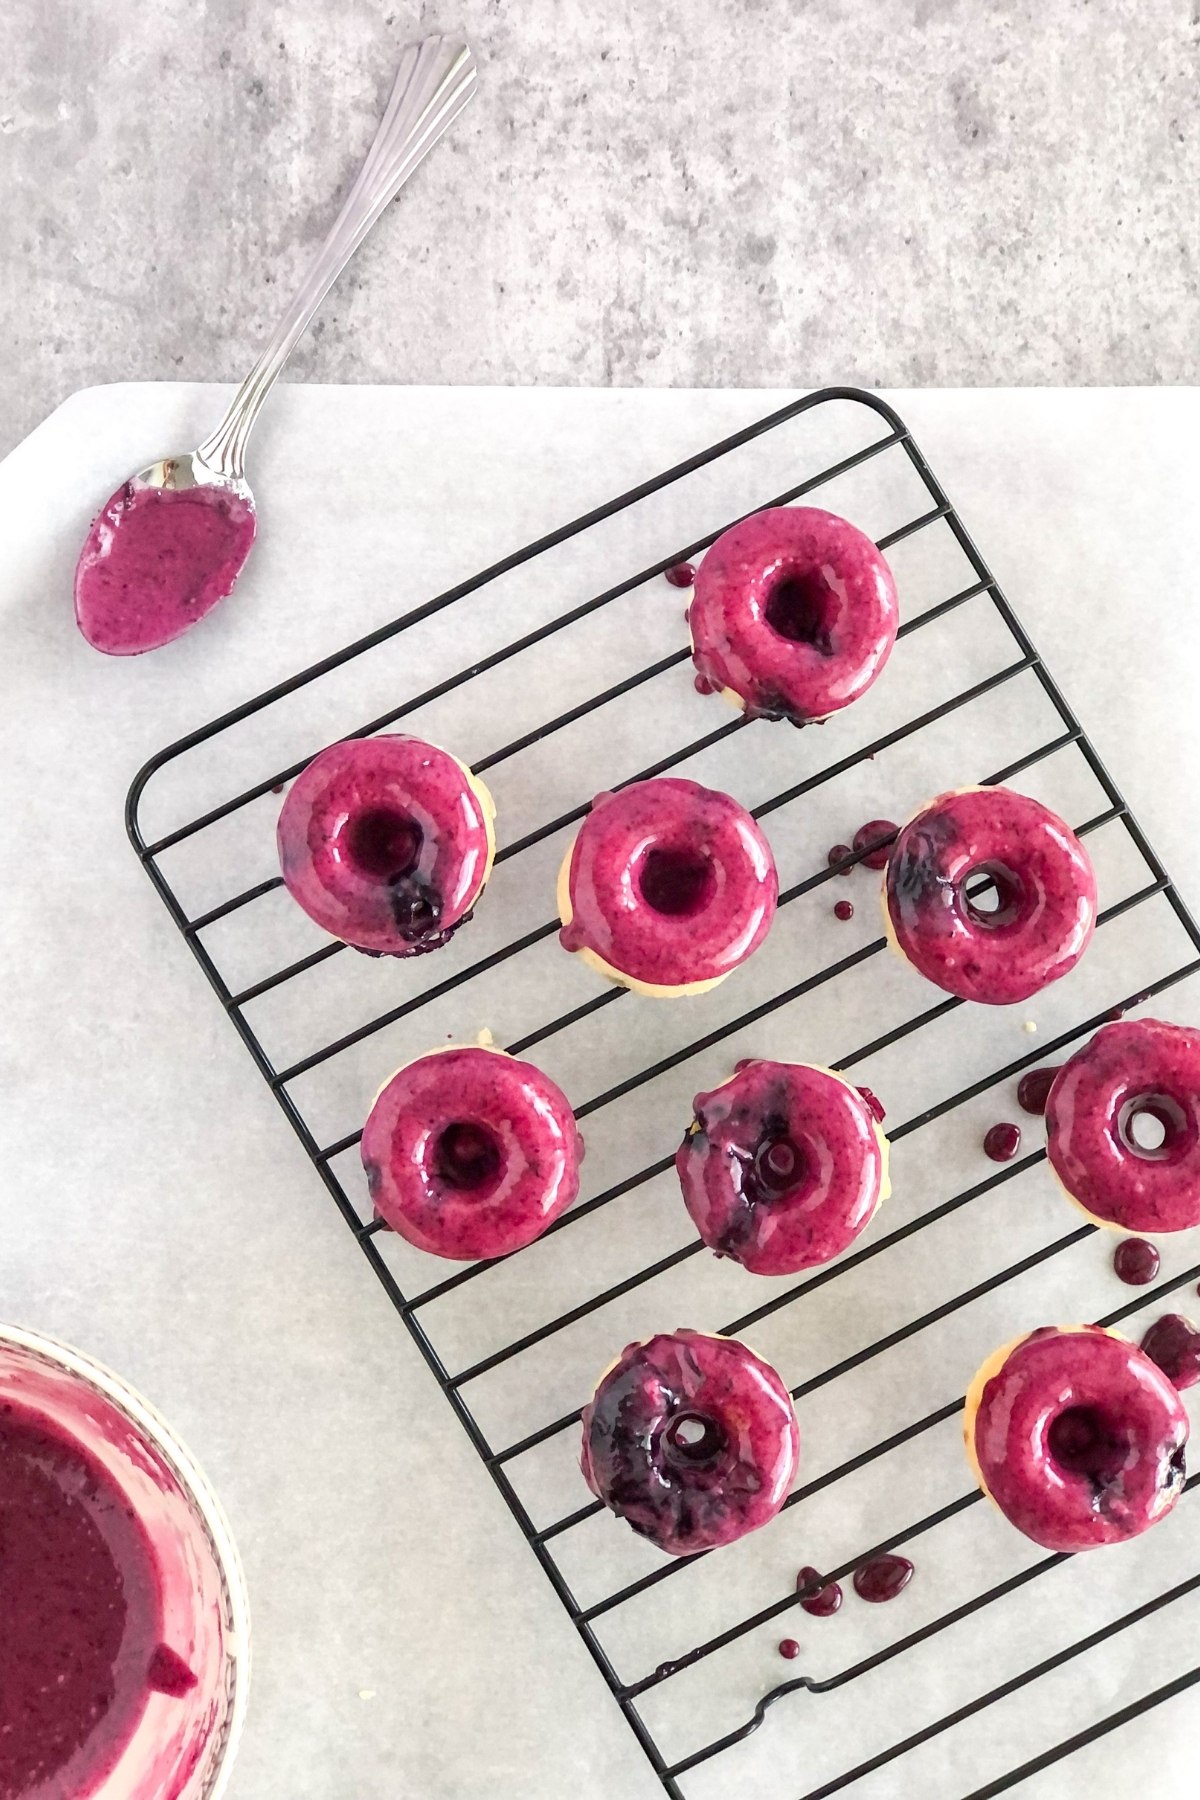 blueberry glazed mini donuts on a cooling rack